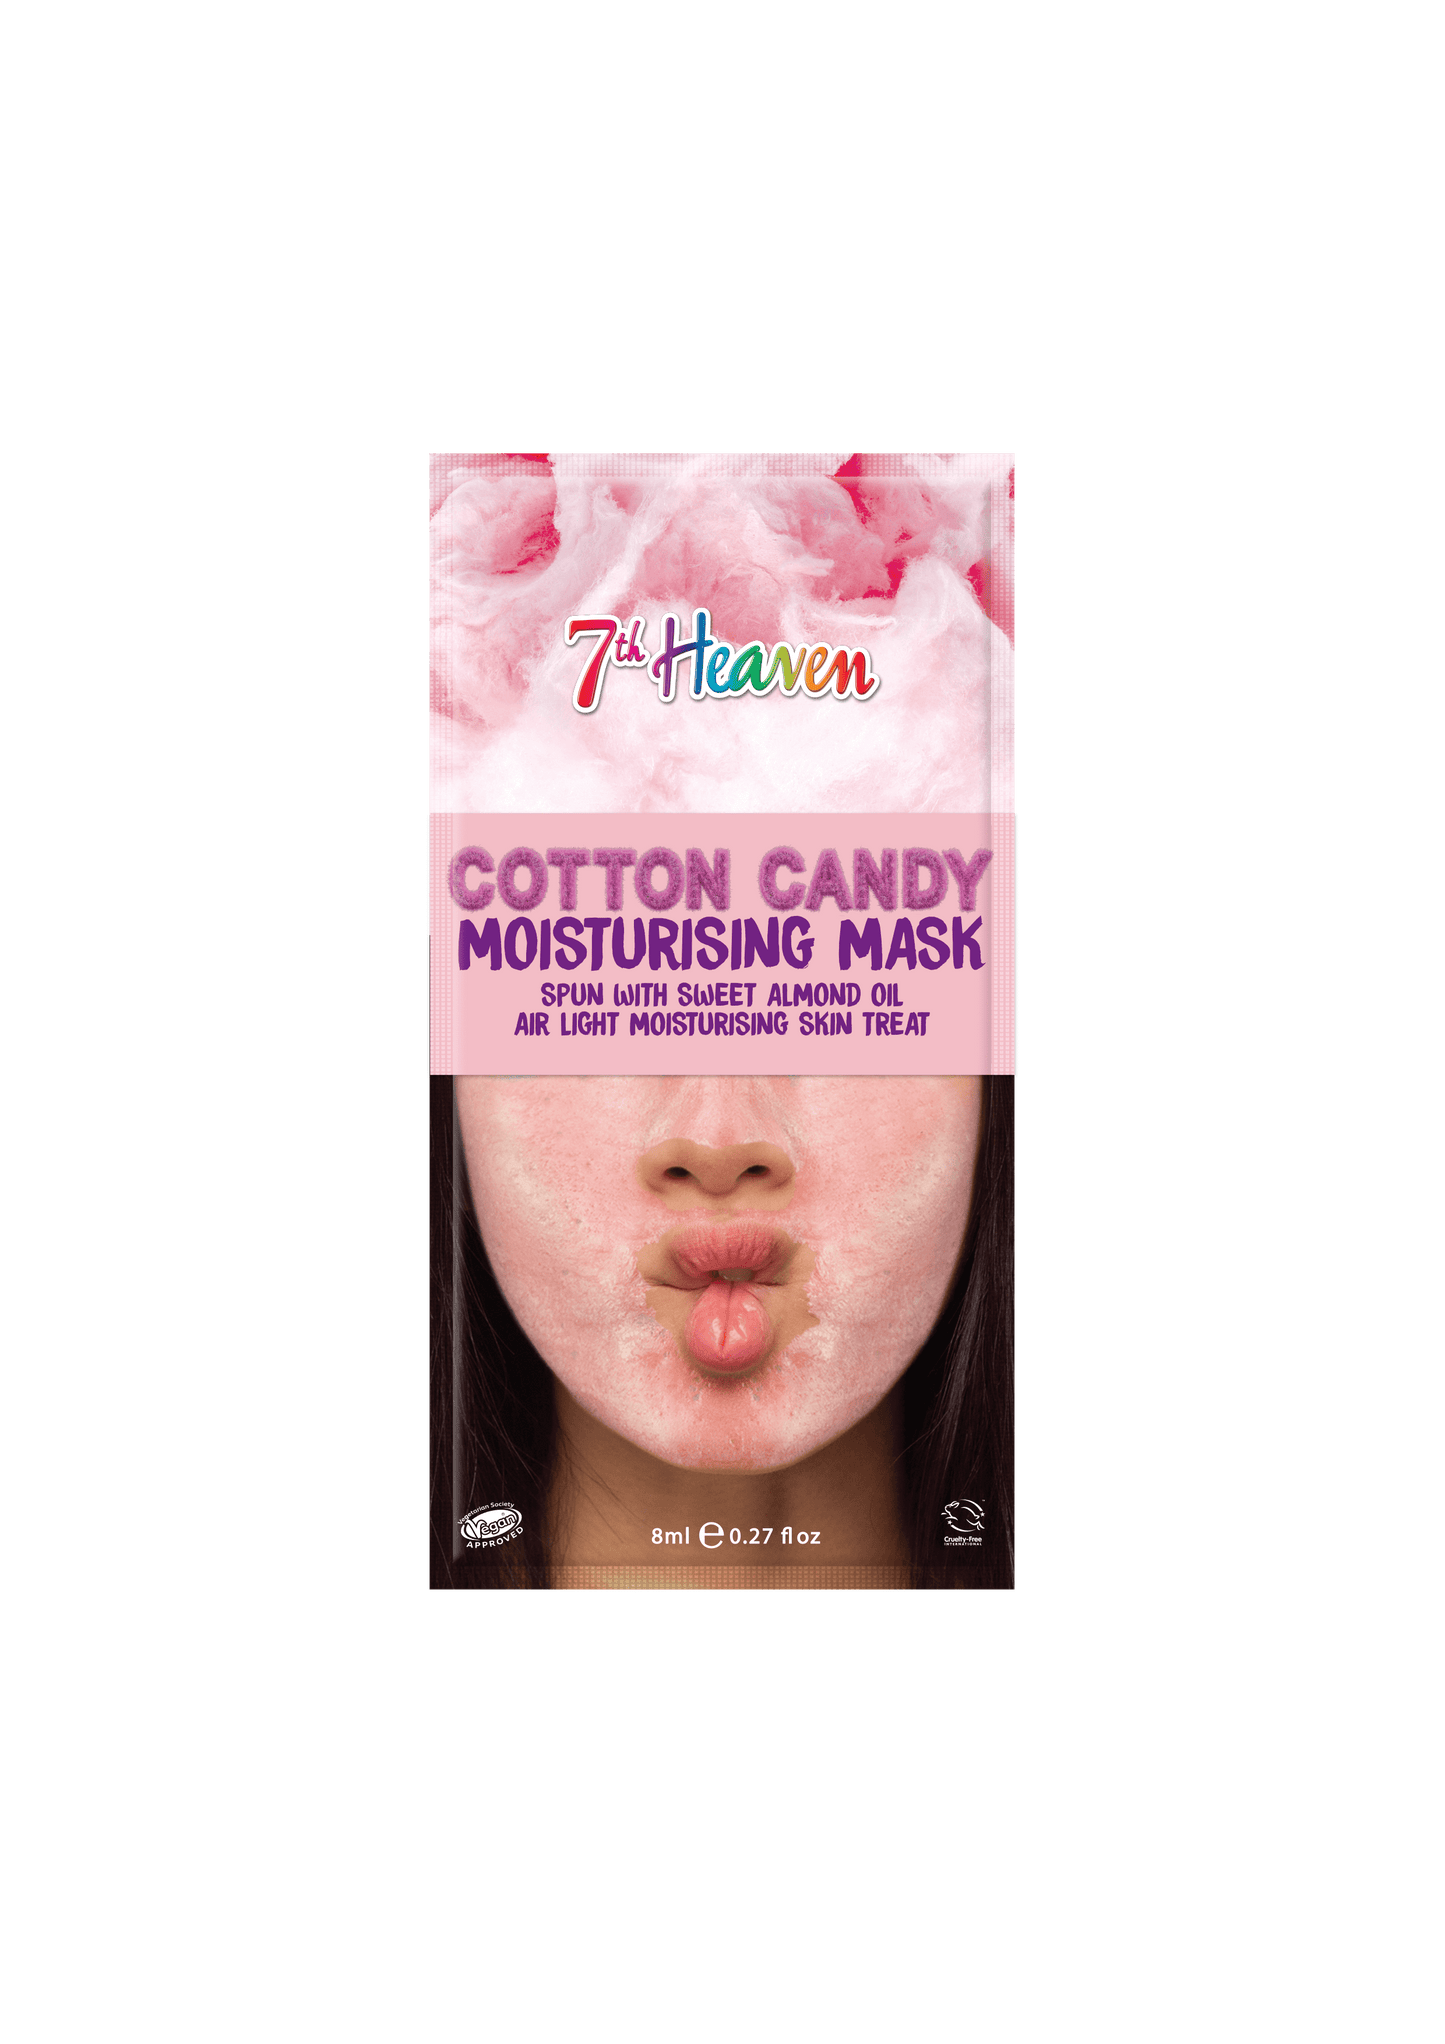 7th Heaven Cotton Candy Light Moisturising Skincare Face Mask with Sweet Almond Oil - Ideal for All Skin Types